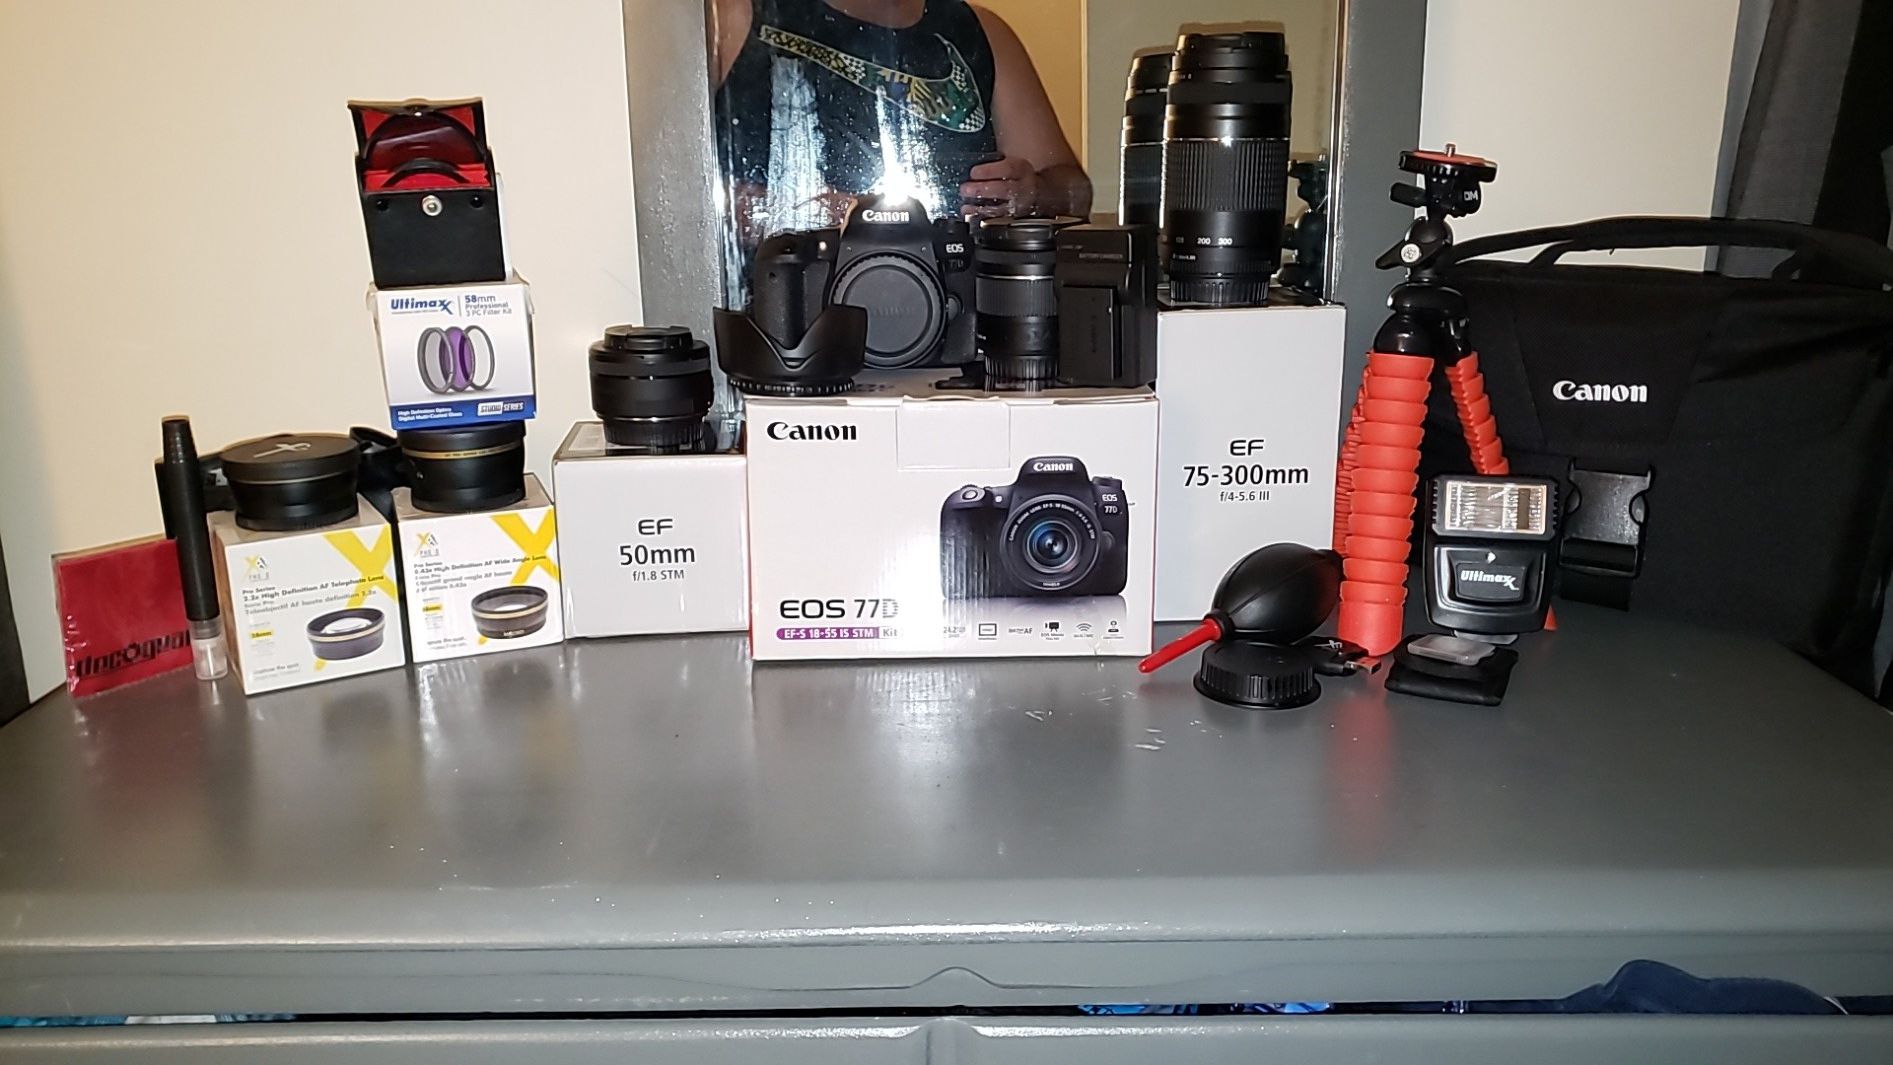 🚨 CAMERA BUNDLE SALE 🚨 CANON EOS 77D EVERYTHING INCLUDED WITH MULTIPLE LENSES, BAG, CLEANING KIT..